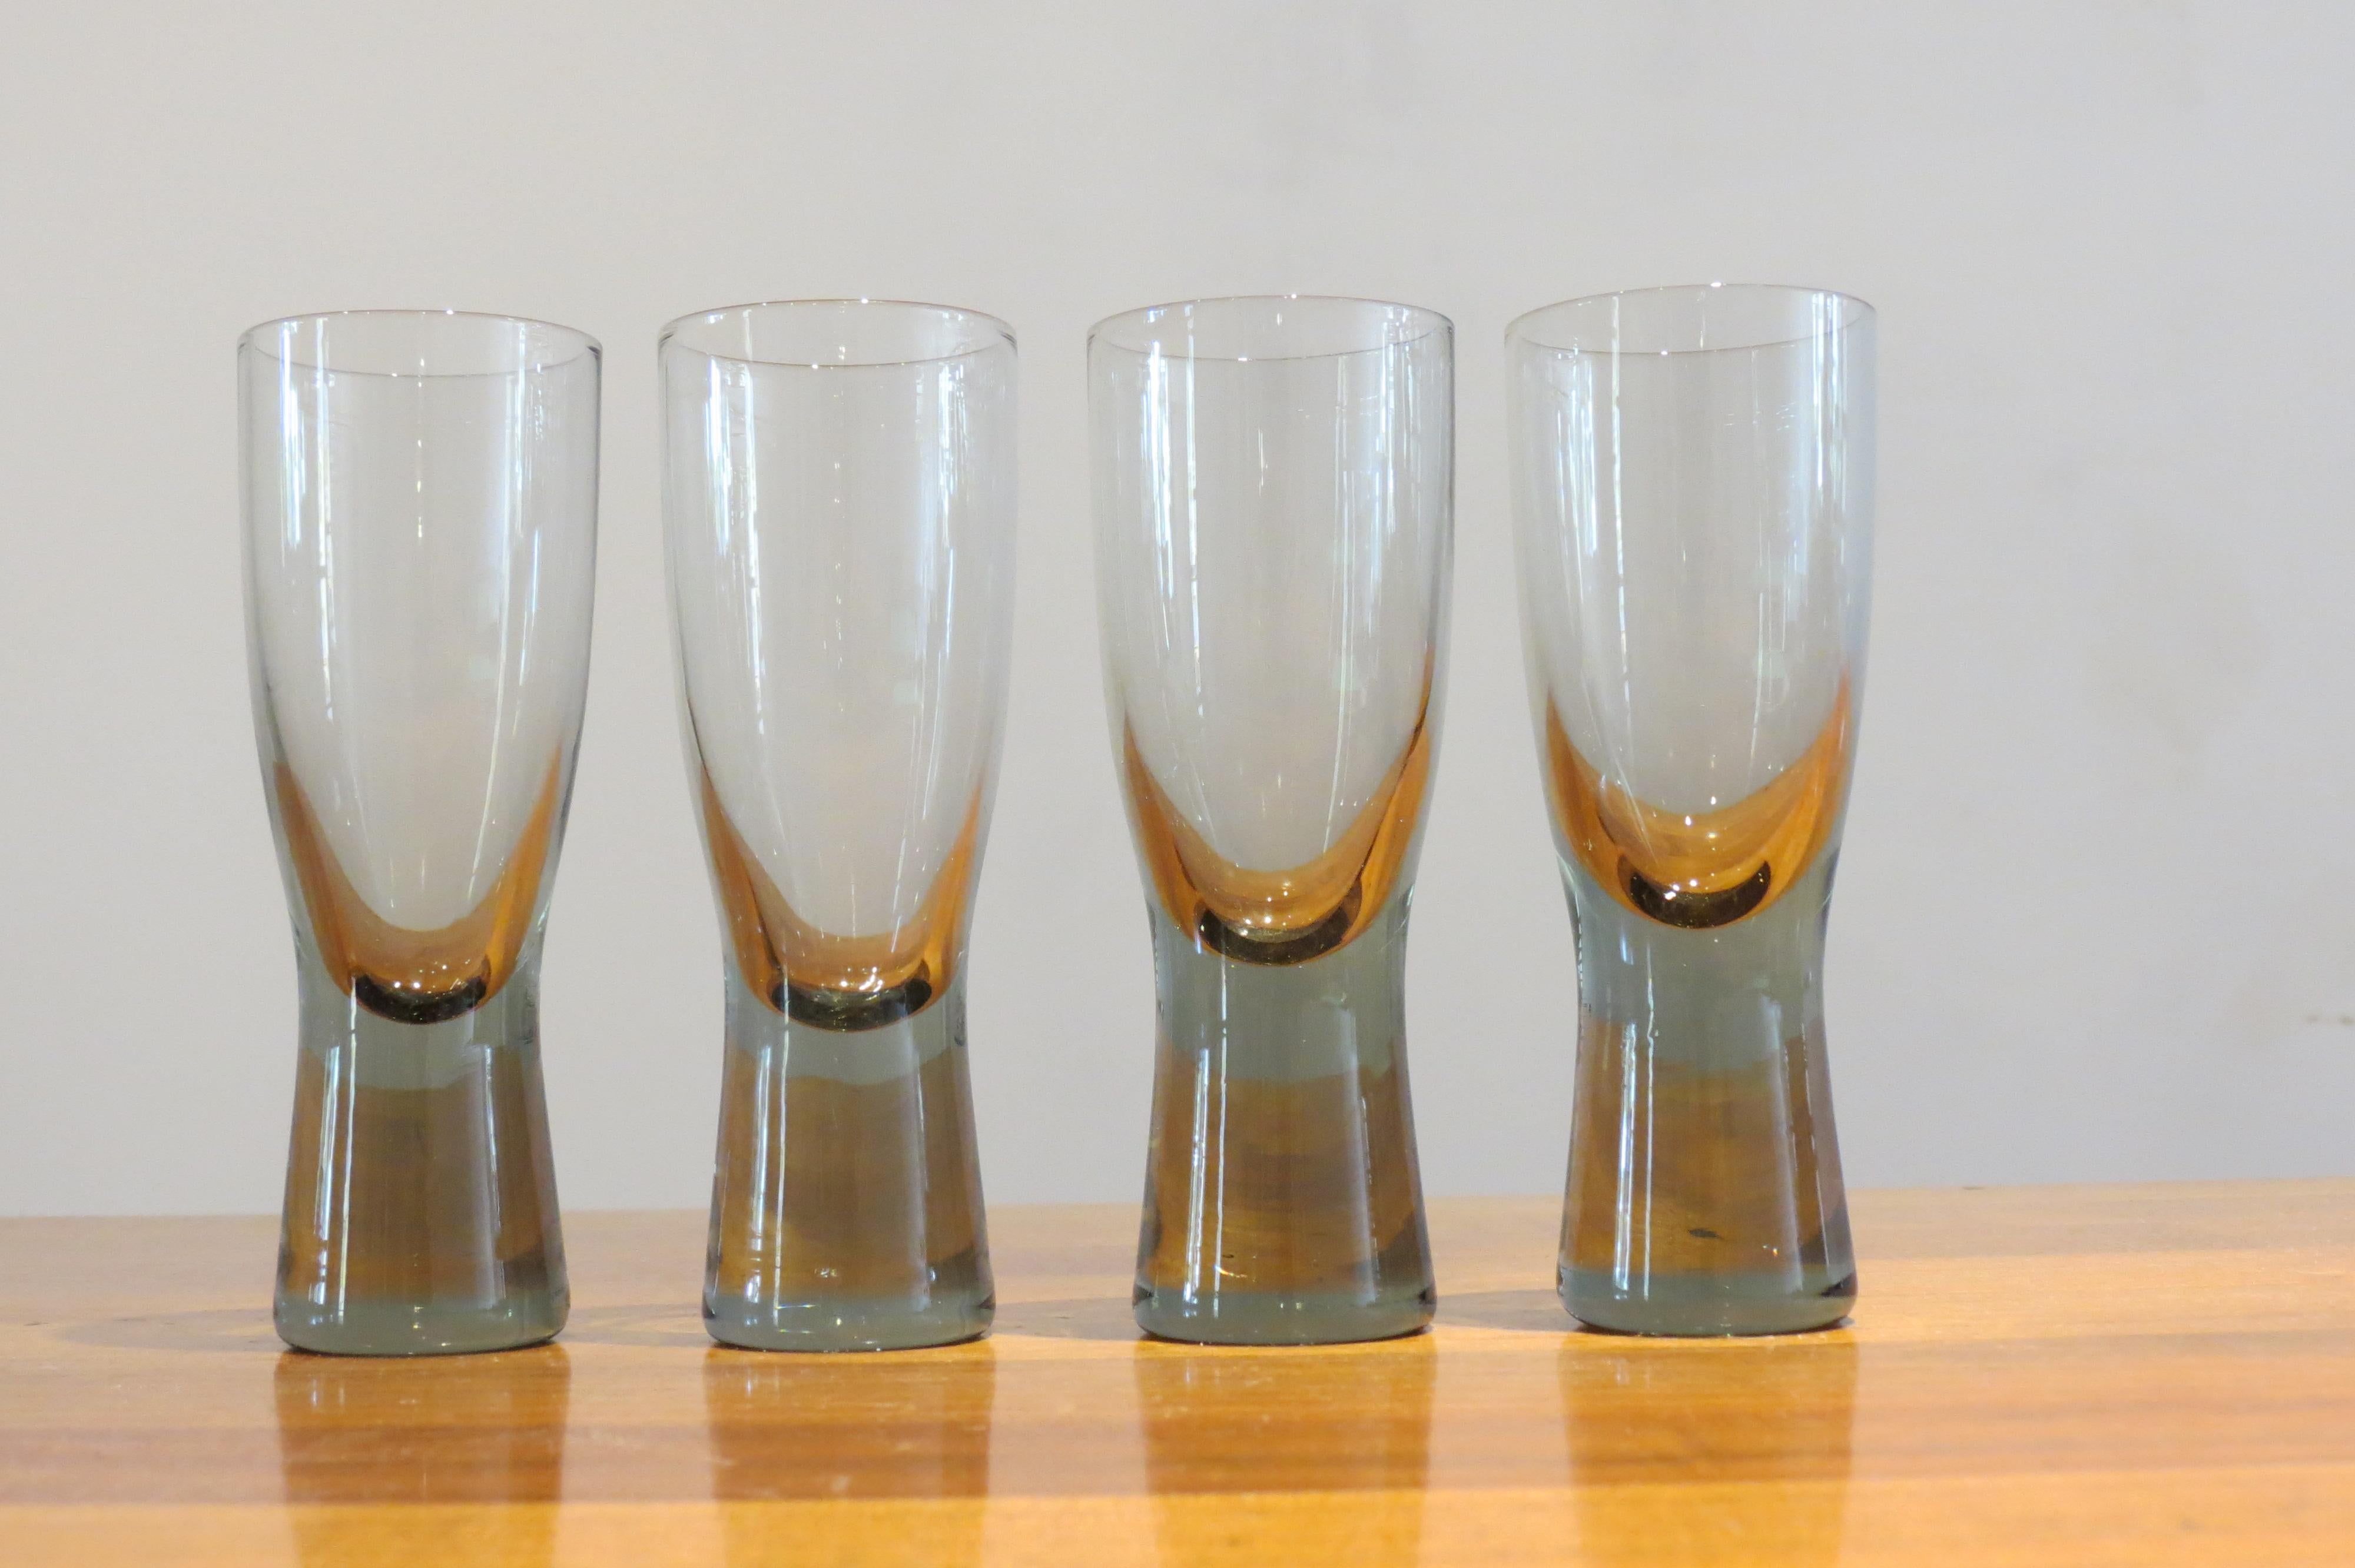 A set of four vintage Holmegaard glasses. 
Designed by Per Lutken, model Canada, 1950s.

Smoked glass
Good condition
Measures: 11.5cm tall, 4.2cm diameter widest point 
St926.

 